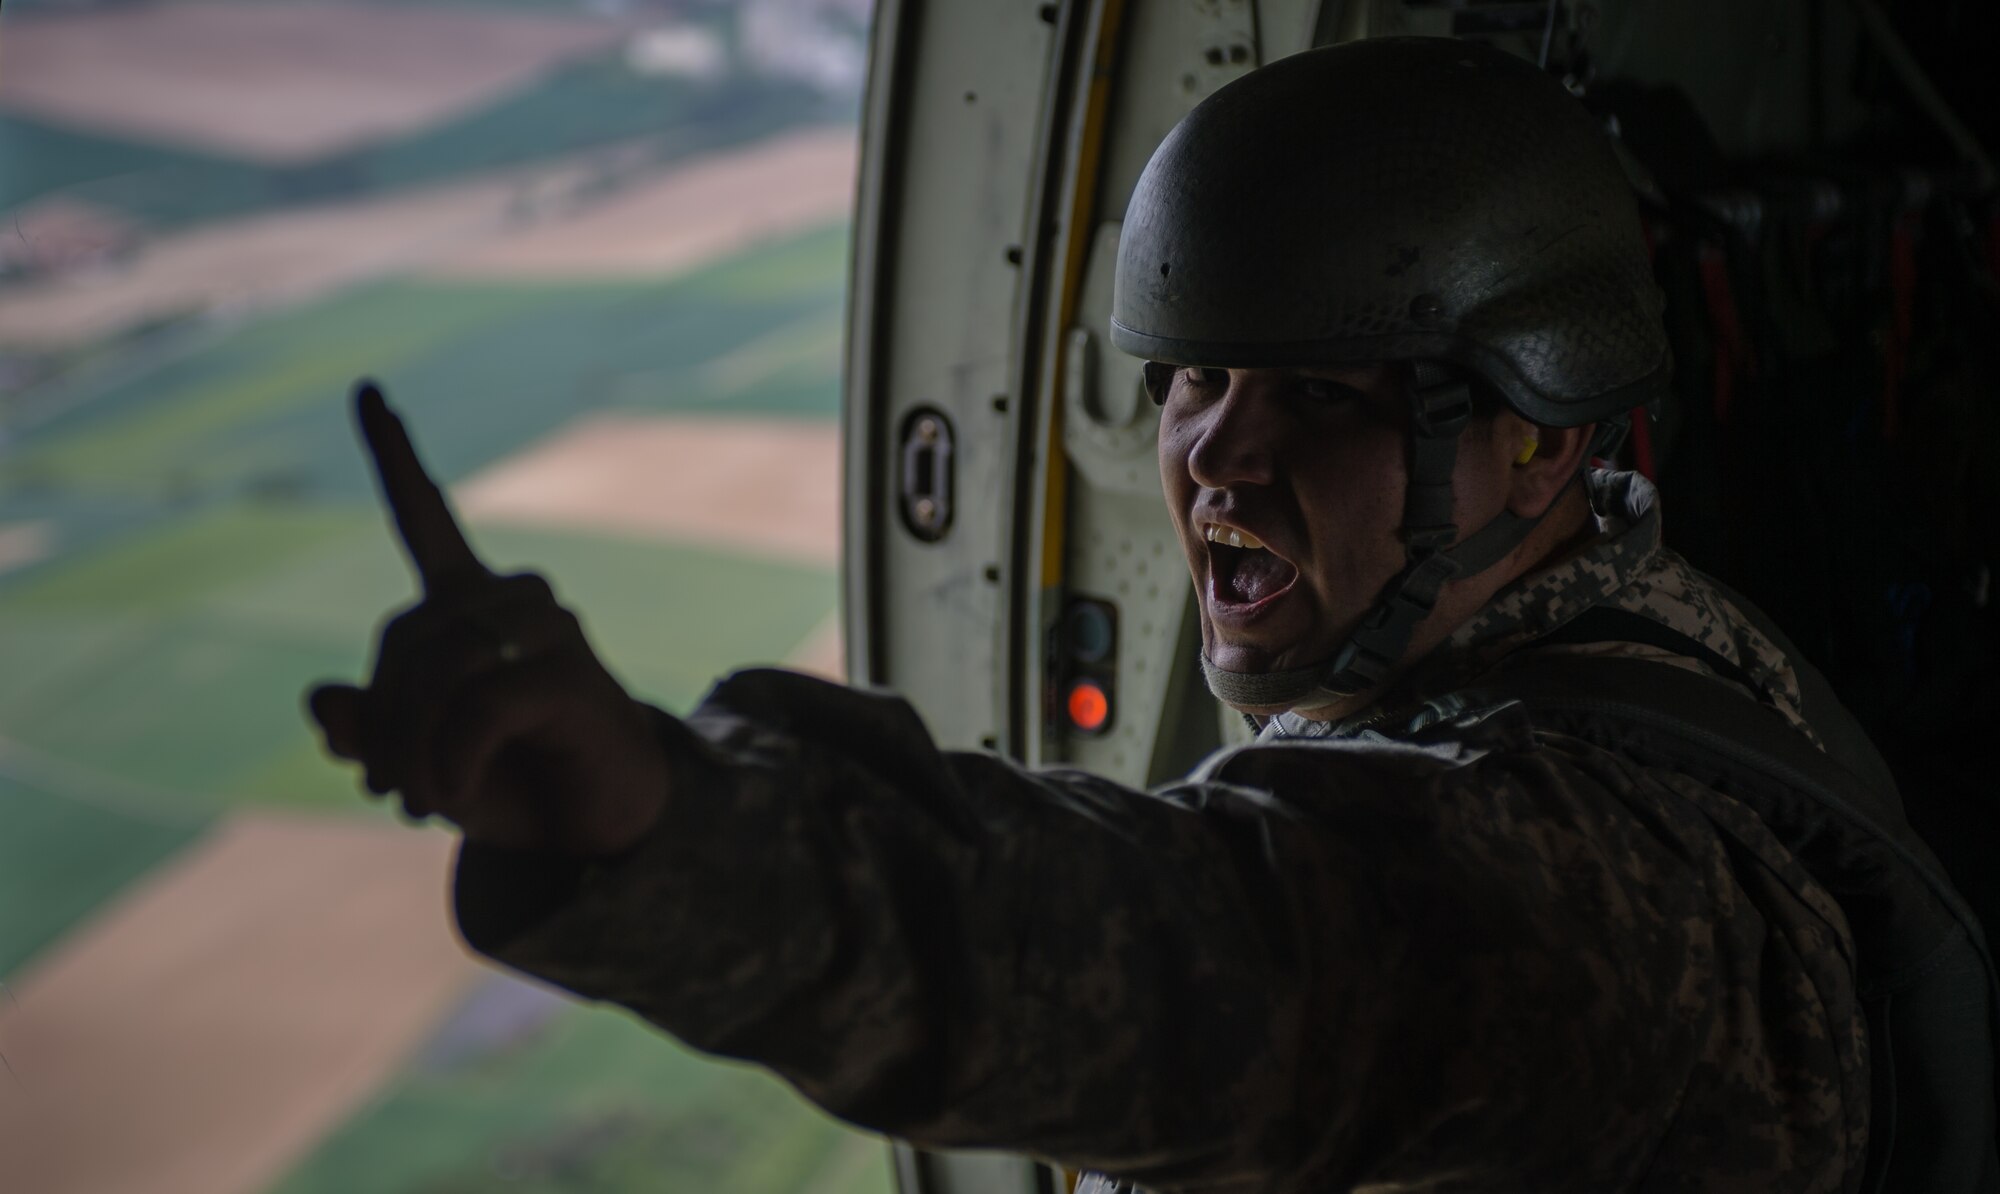 Army Staff Sgt. Alexander Munoz-Lamos, Special Operations Command Africa air NCO, a Fayetteville, North Carolina resident, informs paratroopers inside a C-130J Super Hercules the estimated time to target as part of International Jump Week over Germany, May 6, 2014. A total of 97 foreign and allied partners tested, built and strengthened partnerships during jump week alongside American Airmen and Soldiers. (U.S. Air Force photo/Airman 1st Class Jordan Castelan)